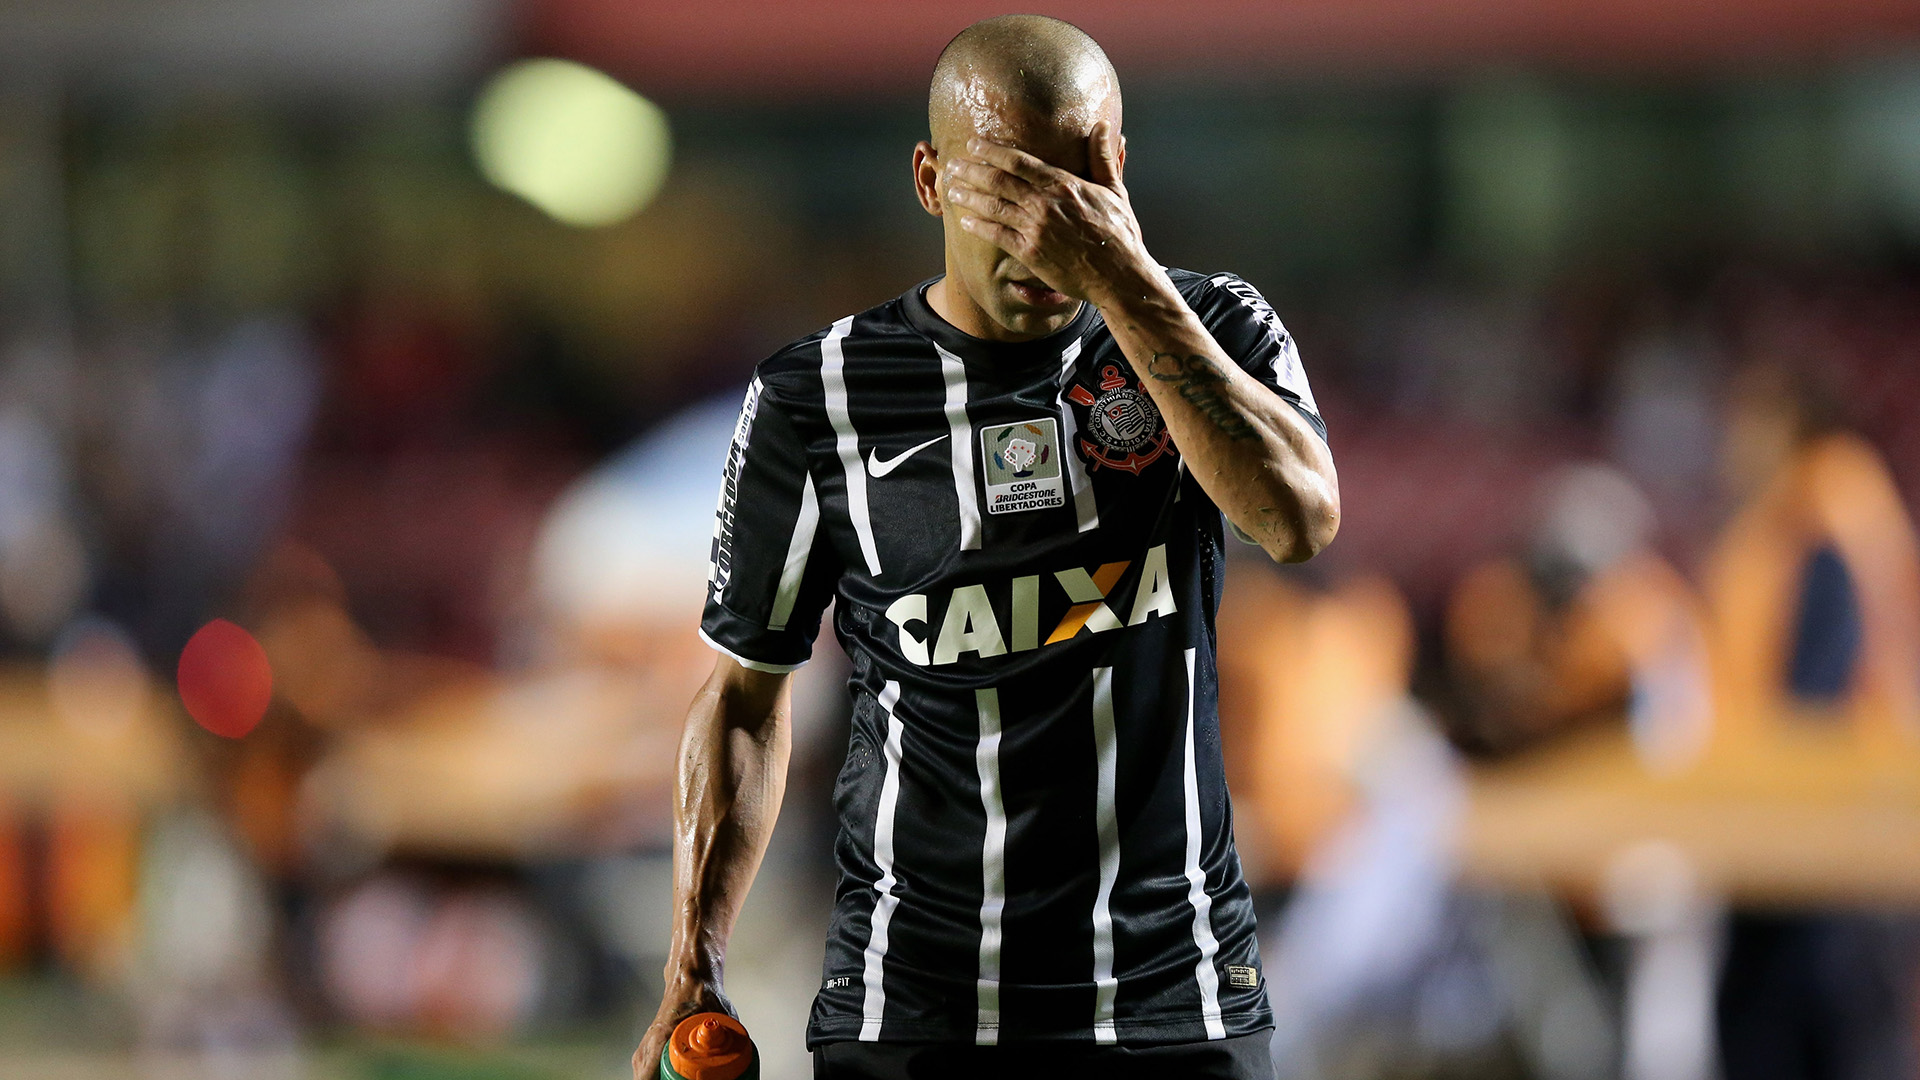 SAO PAULO, BRAZIL - APRIL 22:  Emerson of Corinthians reacts after getting the red card during a match between Sao Paulo and Corinthians as part of Group 2 of Copa Bridgestone Libertadores at Morumbi Stadium on April 22, 2015 in Sao Paulo, Brazil.  (Photo by Friedemann Vogel/Getty Images)